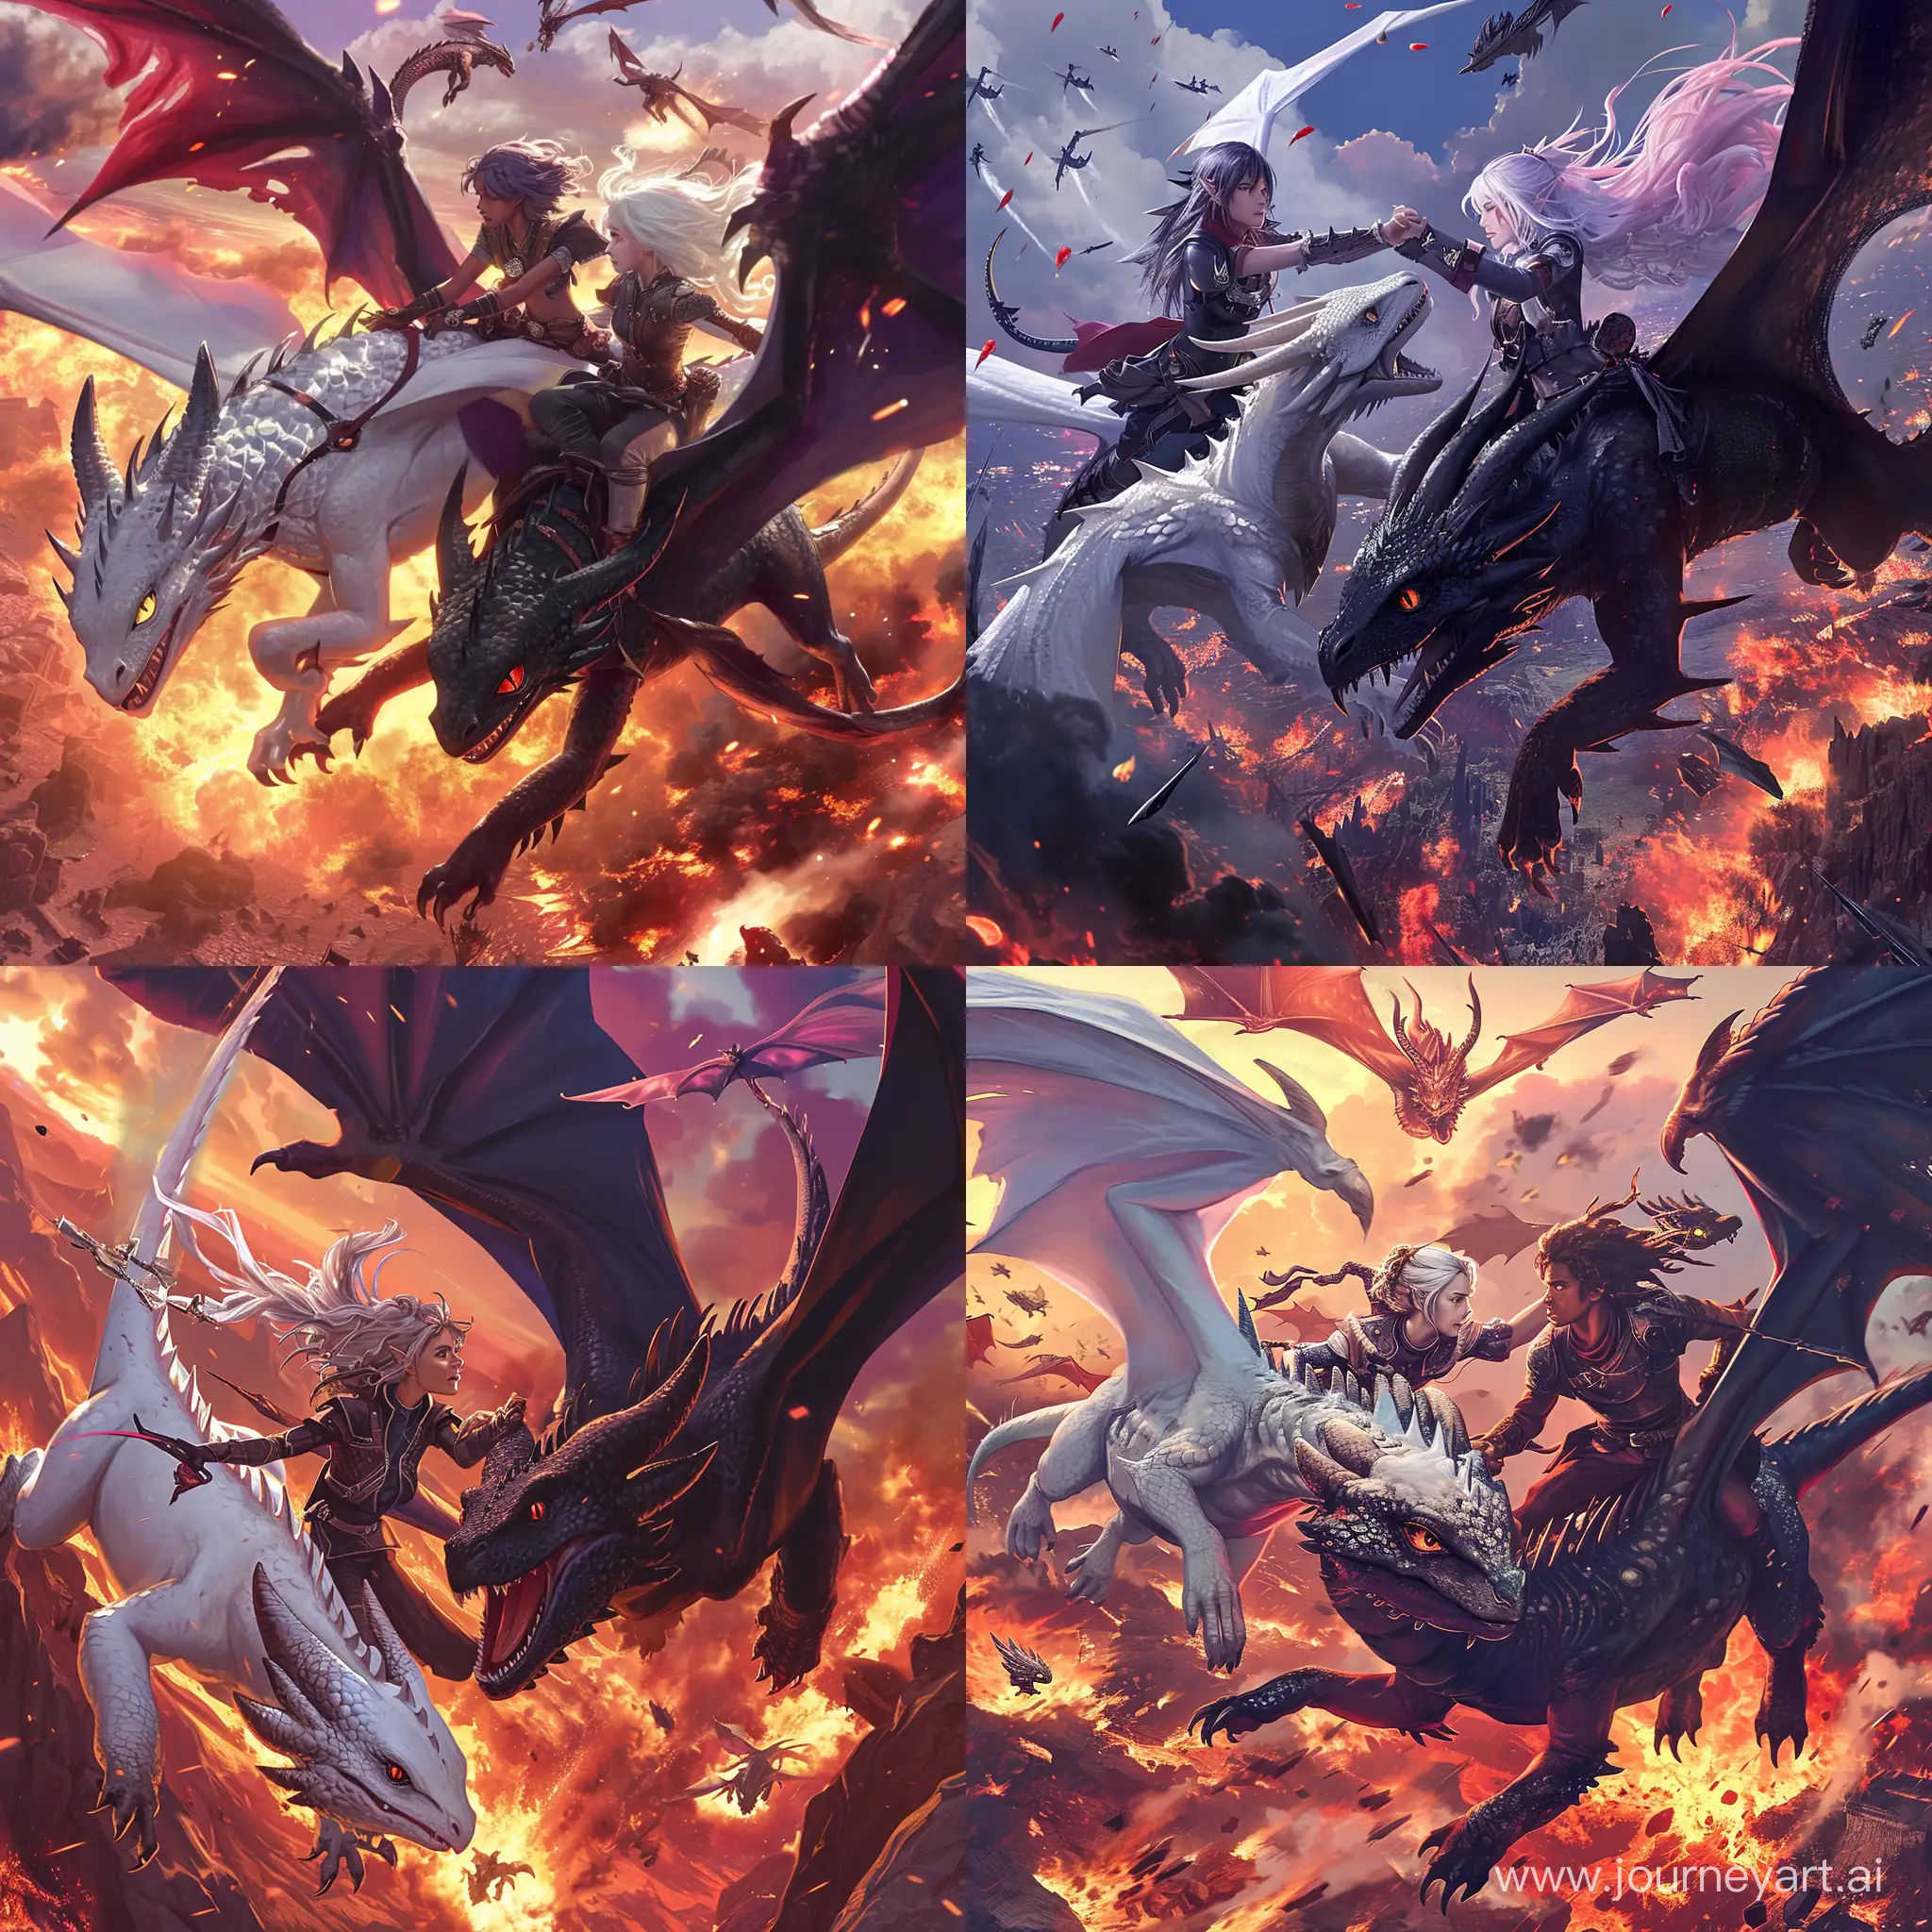 Epic-Dragon-Riders-Love-Scene-with-Fire-and-Determination